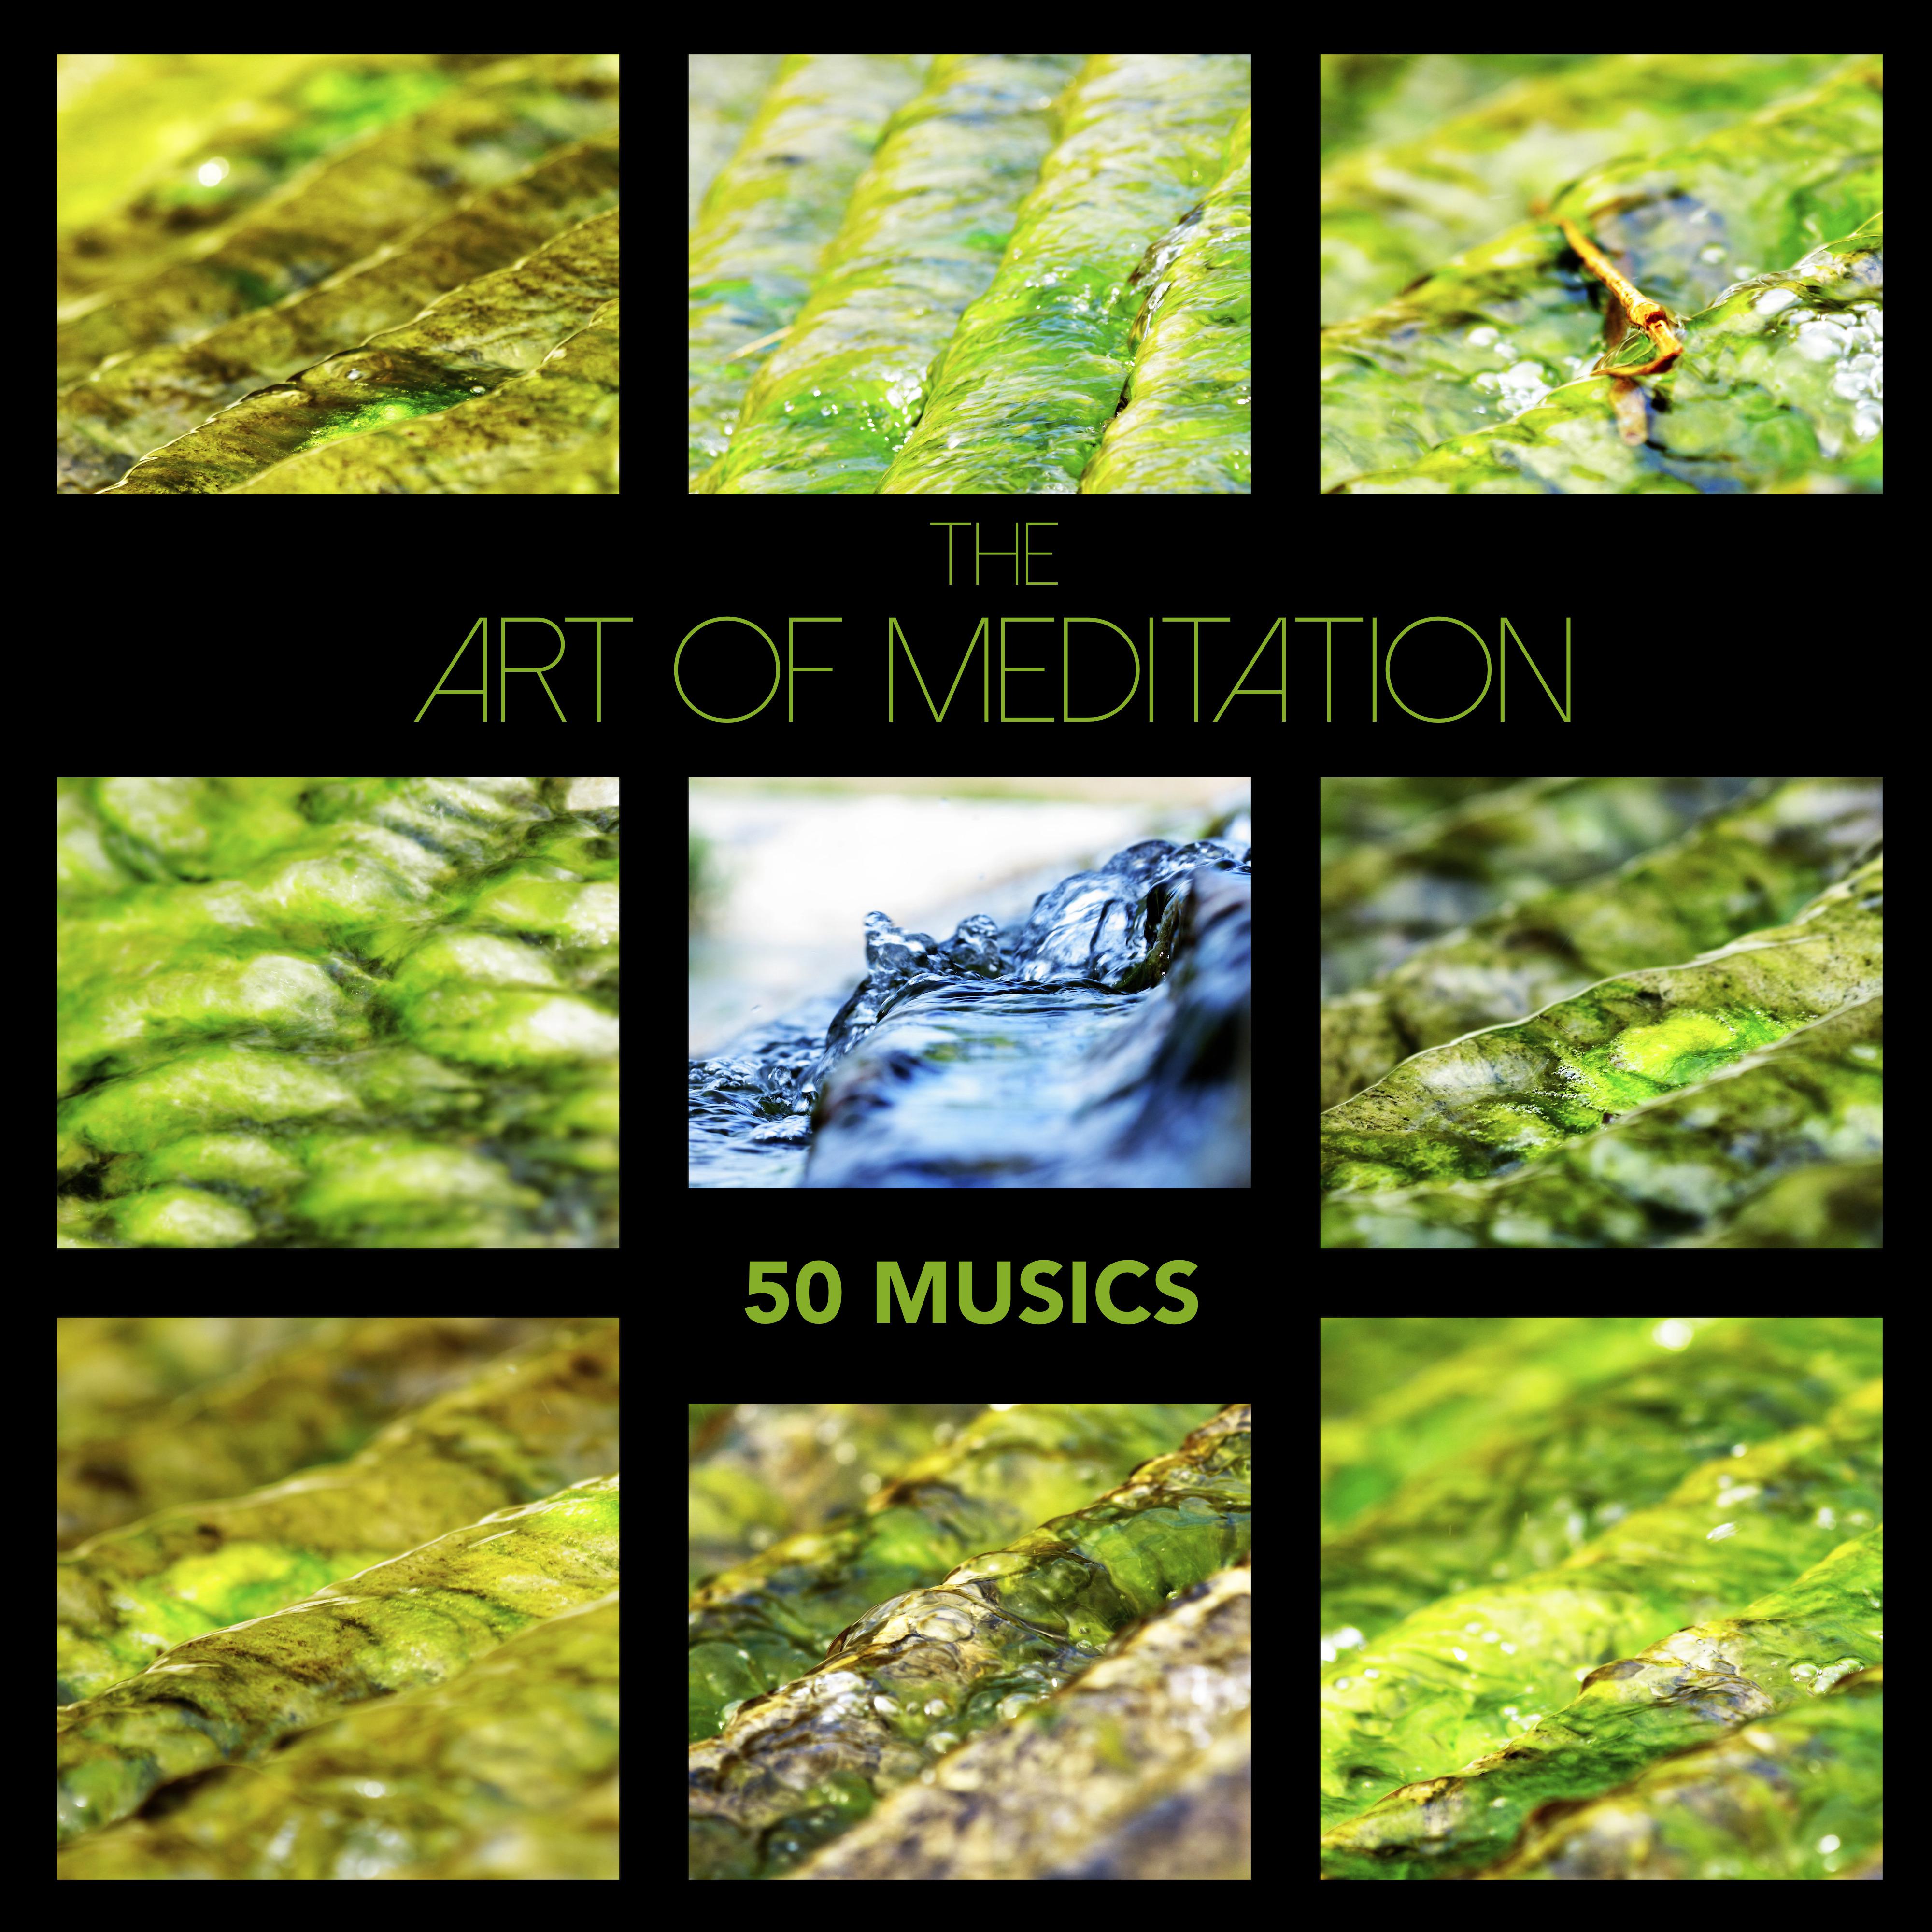 The Art of Meditation: 50 Musics - Zen Garden Meditation Music & Soothing Sleep Sounds for Relaxation, Mindfulness Therapy and Healing Sleep